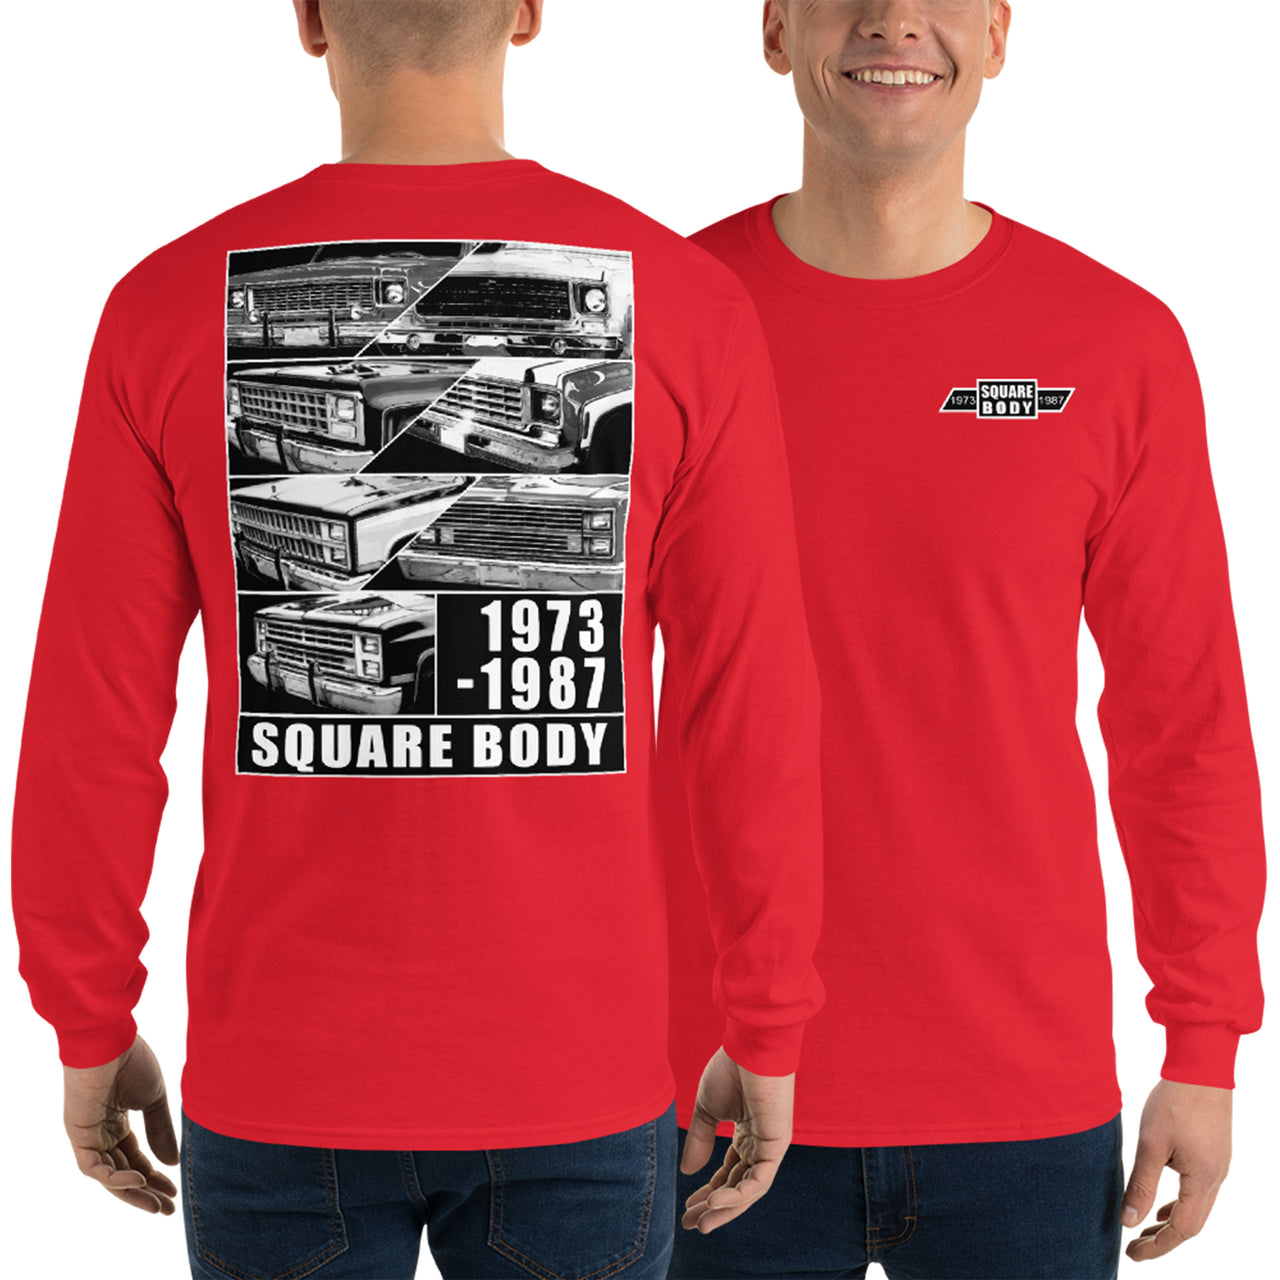 Square Body 1973-1987 Long Sleeve T-Shirt modeled in red